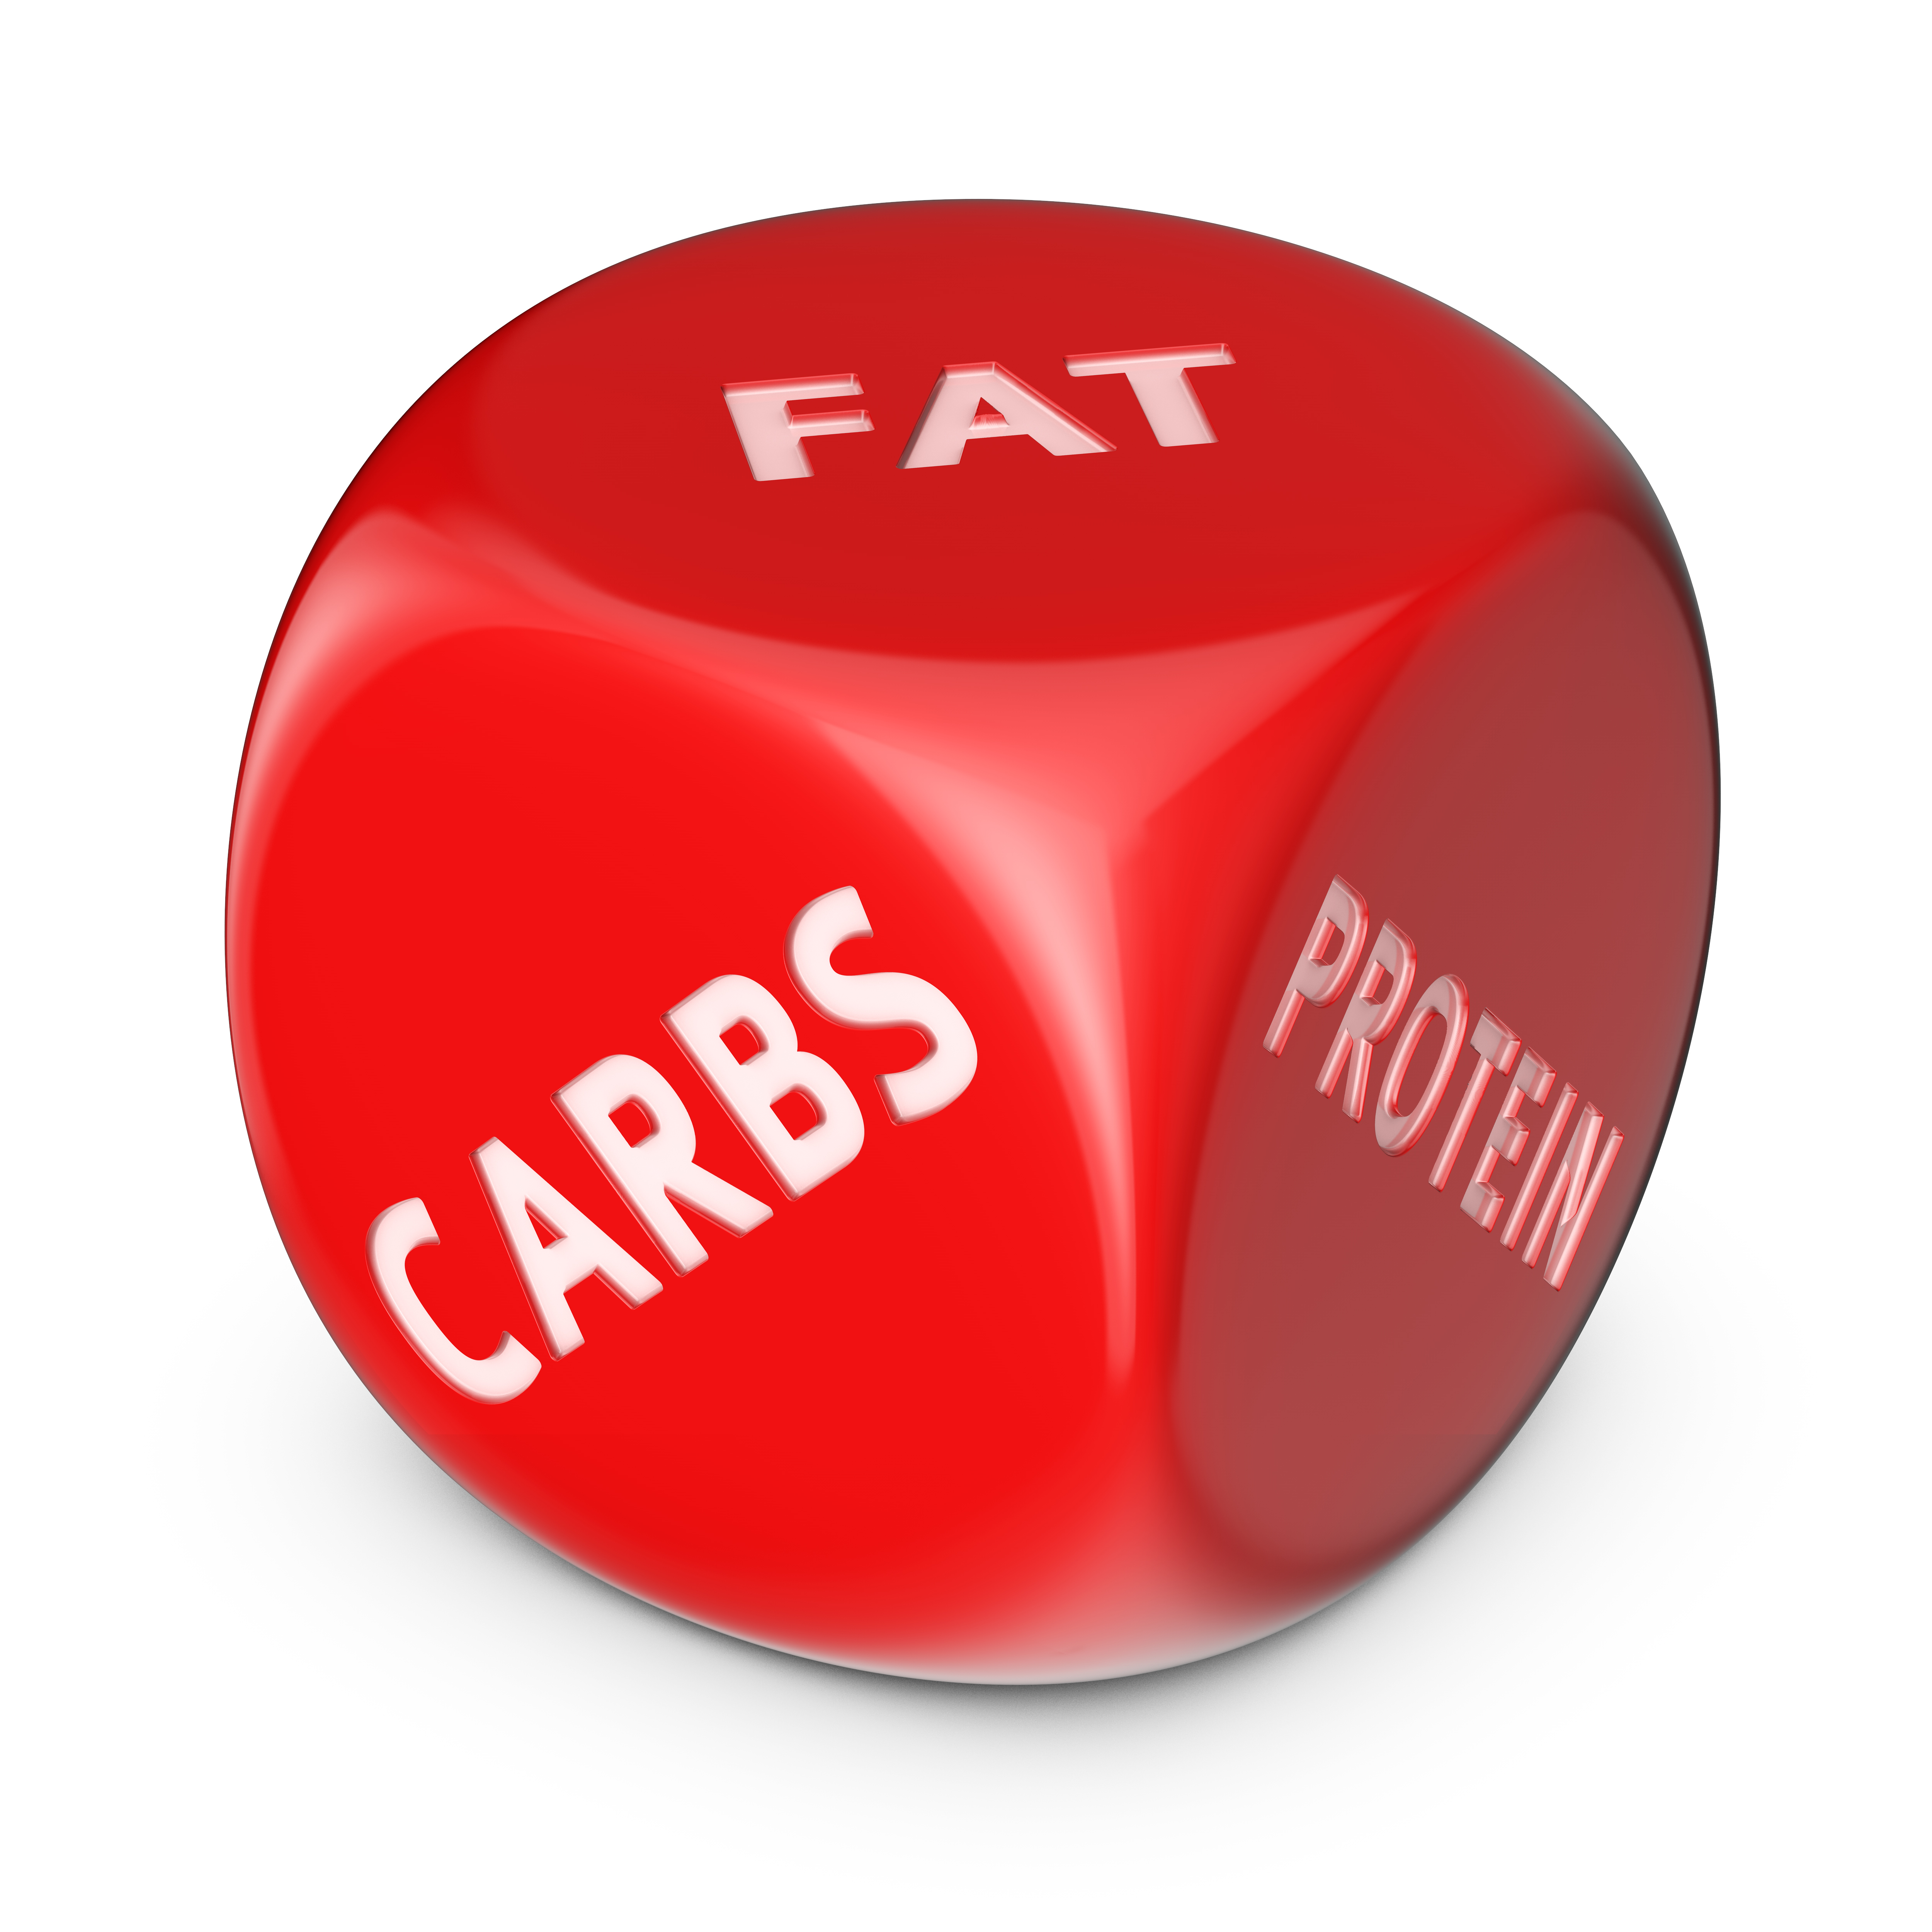 Key differences between keto and low carb diet is the amount of carbs